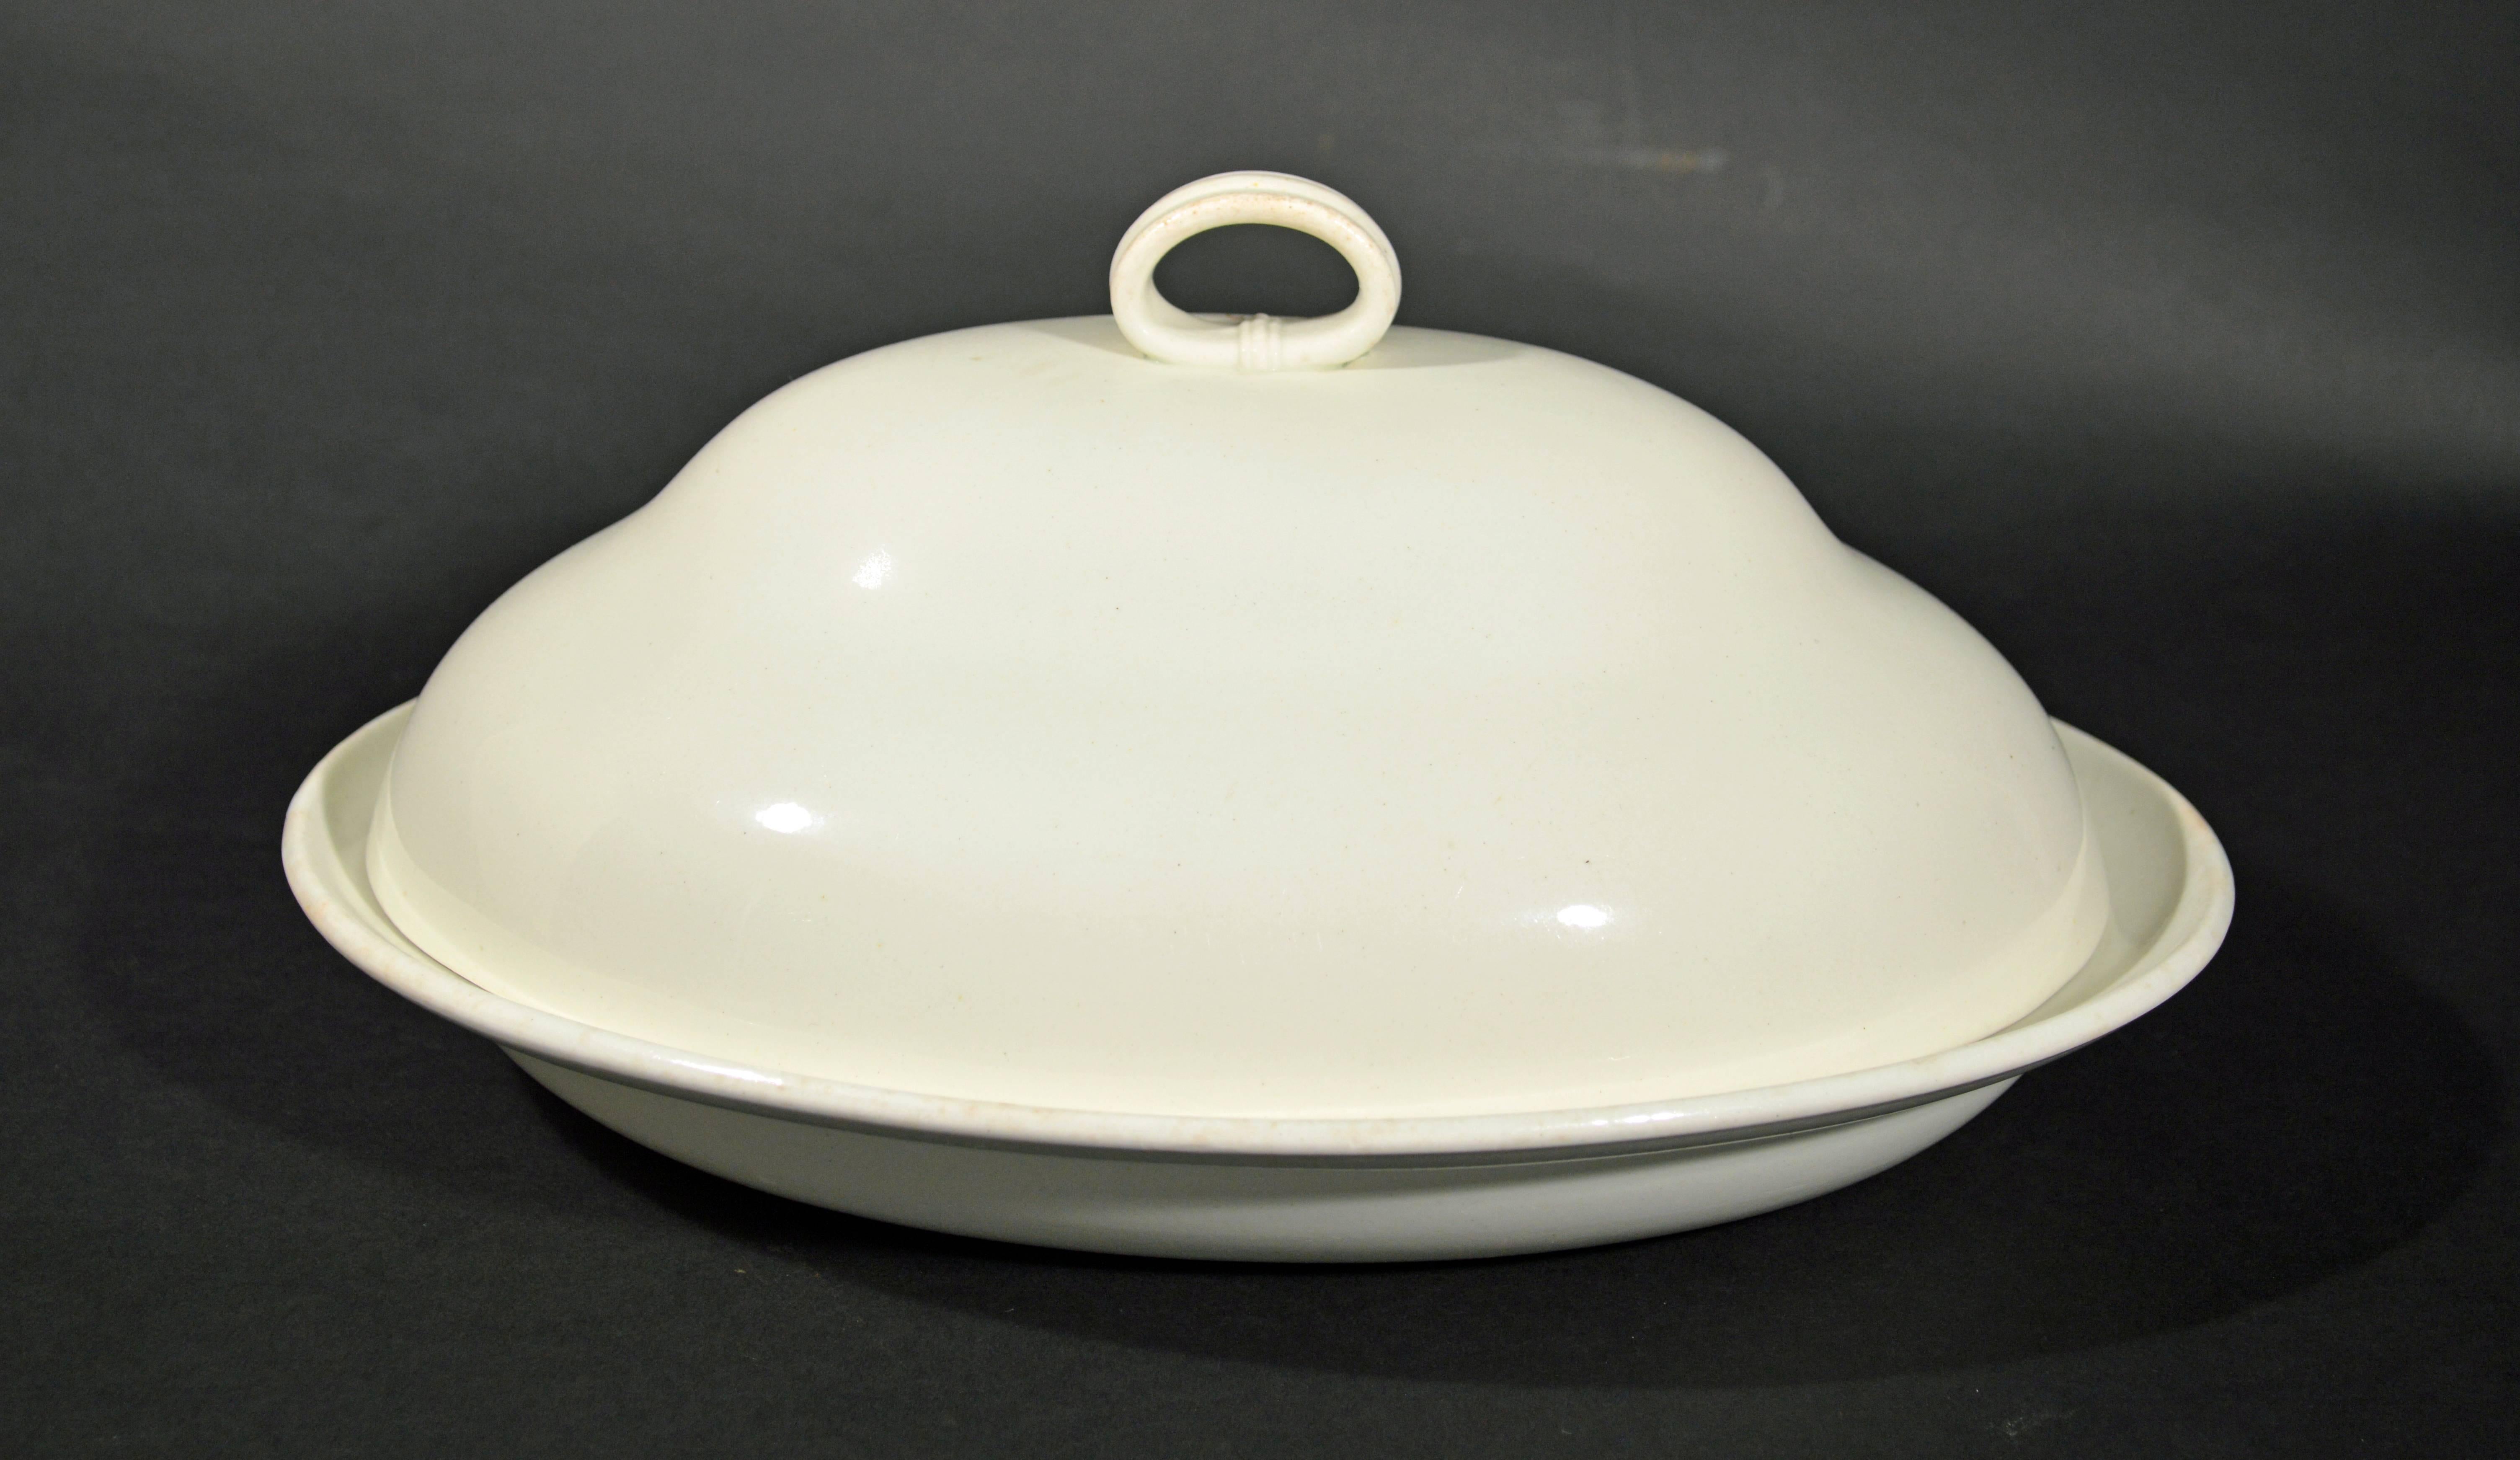 Wedgwood plain creamware vegetable tureen and cover,
circa 1785-1800.

Neoclassical wedgwood vegetable tureen and cover consists of a shallow oval body with an angled rim with a double domed cover surmounted with a simple double ribbed oval strap